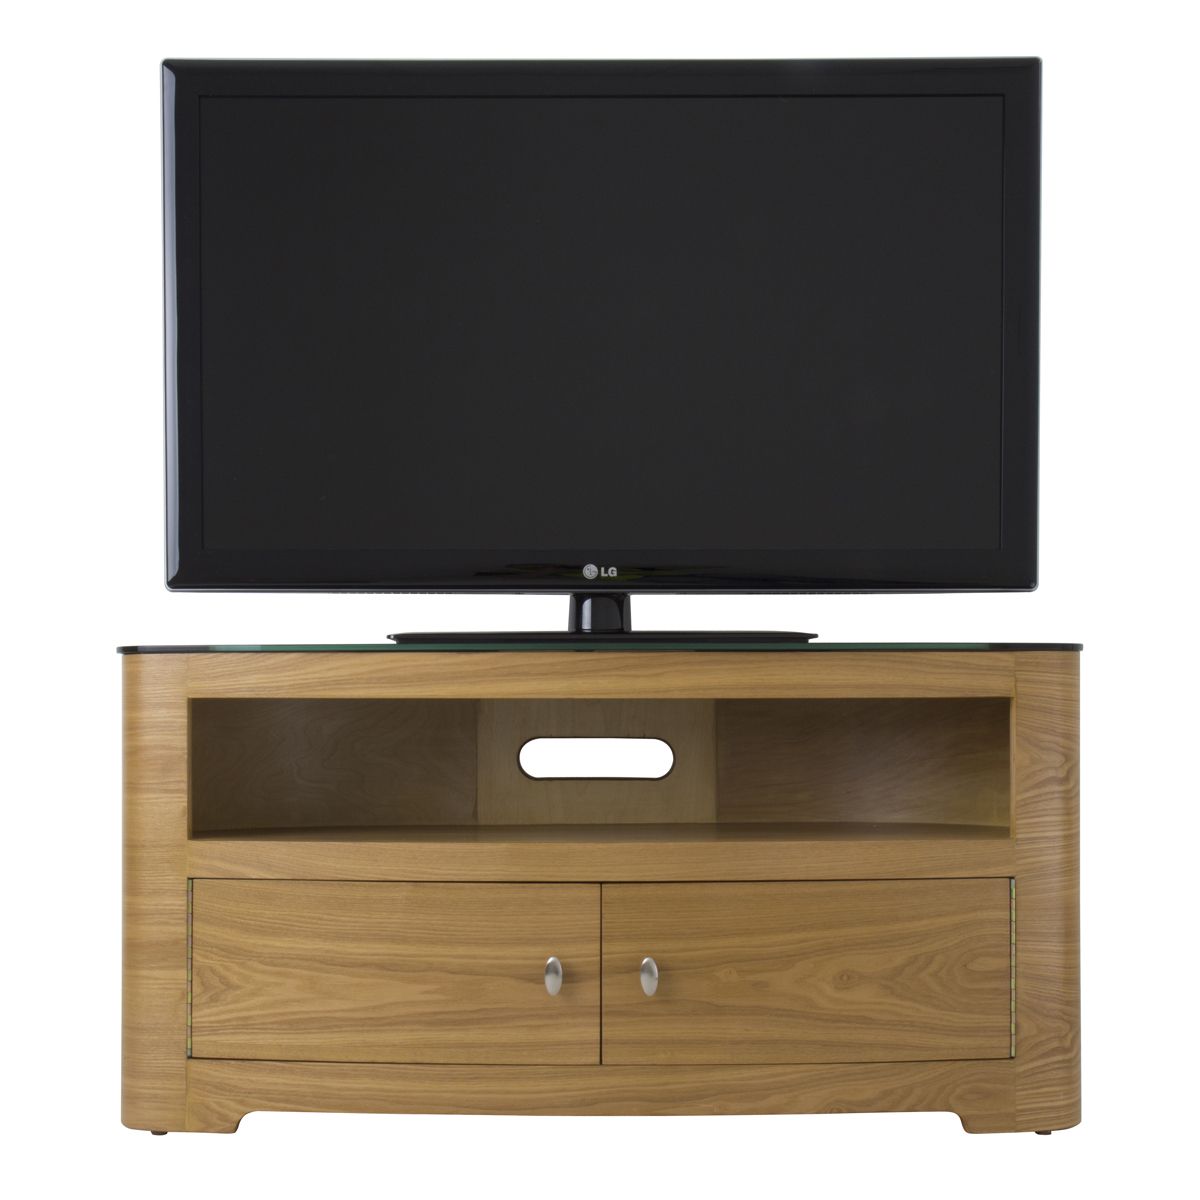 Large Oak Veneer Oval Lcd Plasma Tv Stand Cabinet 42+ Inch Intended For Tv Stands For Plasma Tv (View 8 of 15)